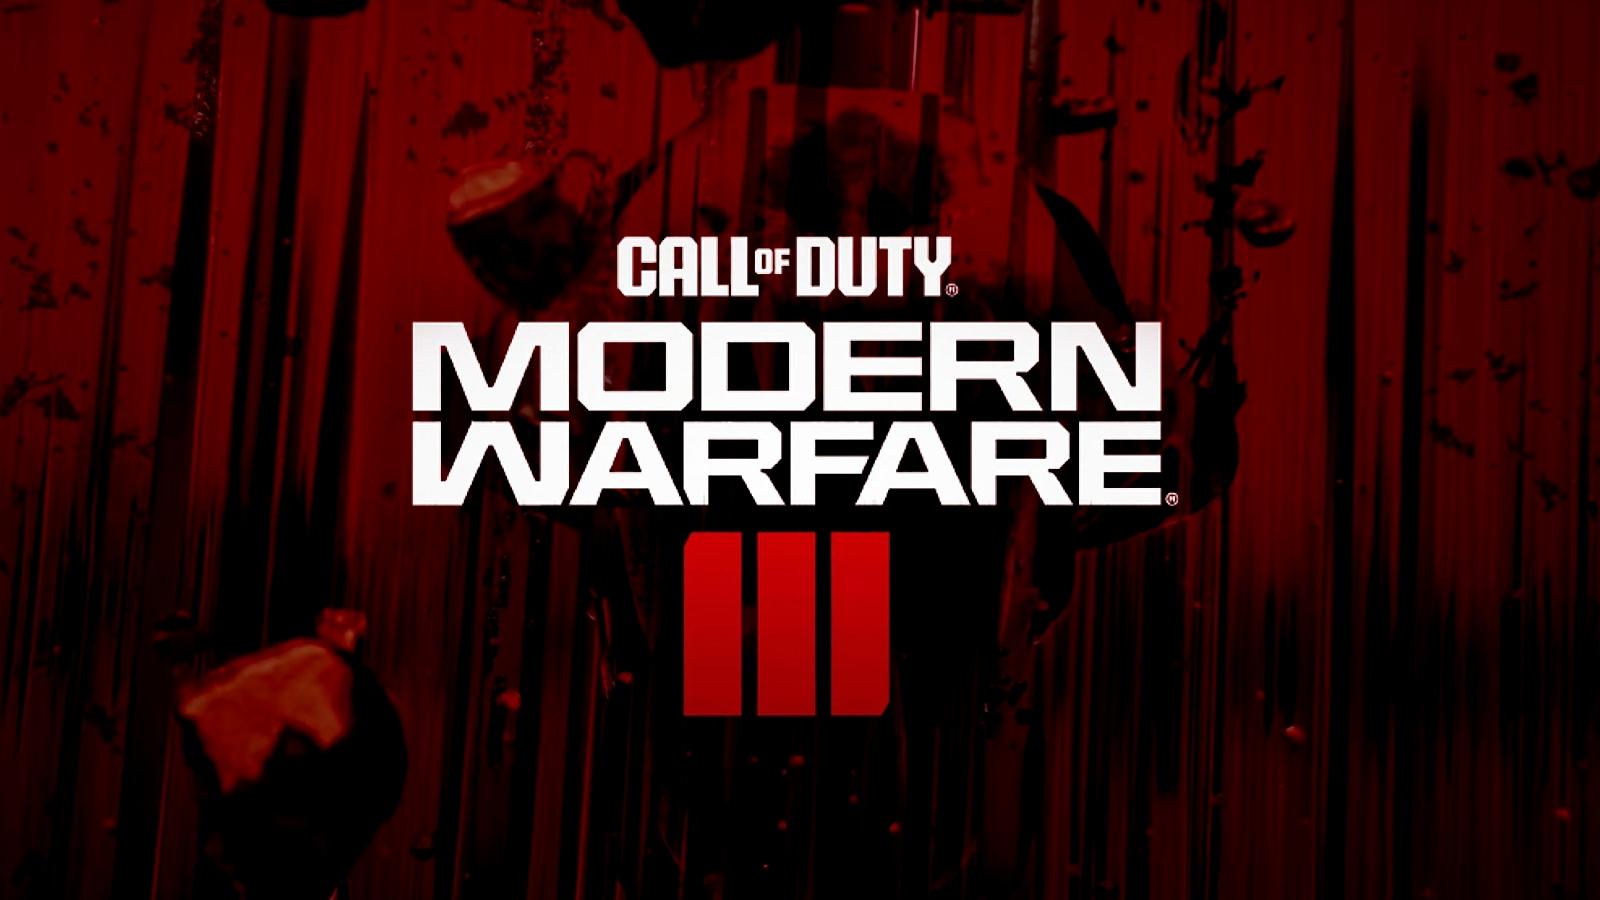 Modern Warfare 3 logo with art from reveal video in background